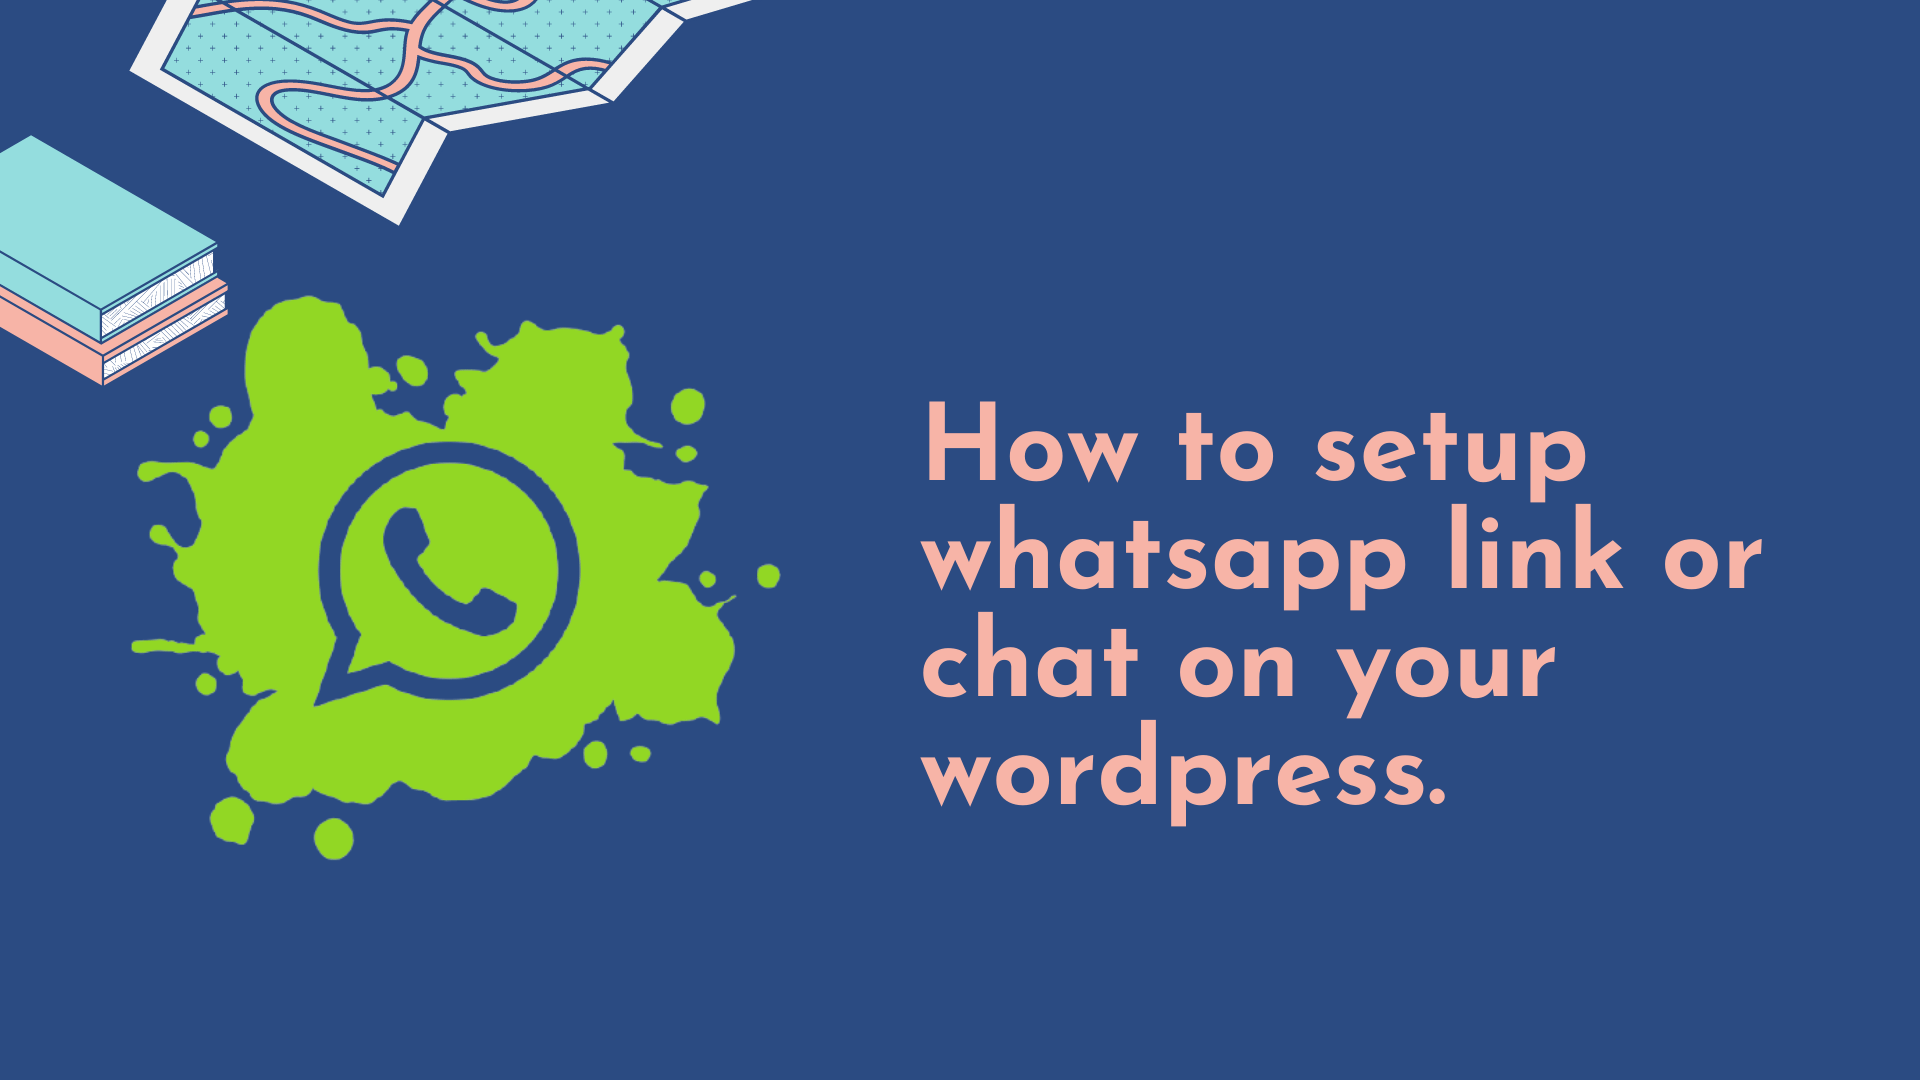 Setting up WhatsApp link or chat on your WordPress